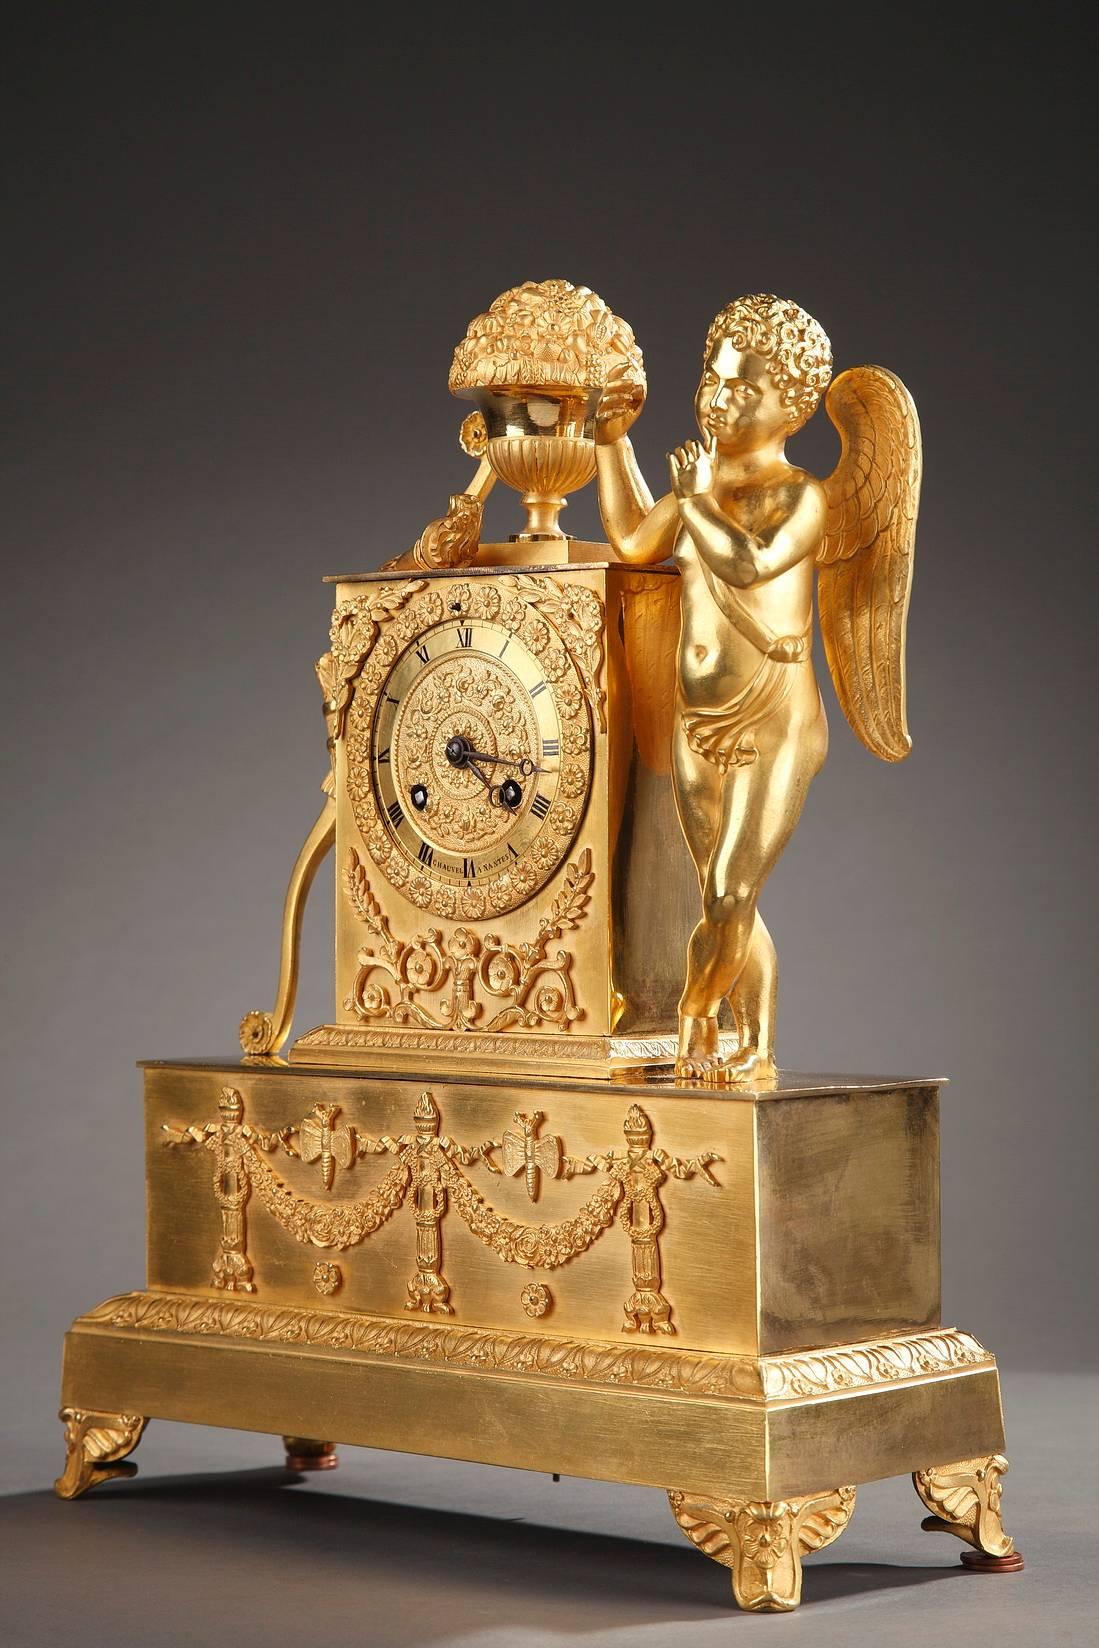 French Early 19th Century Figural Restauration Mantel Clock